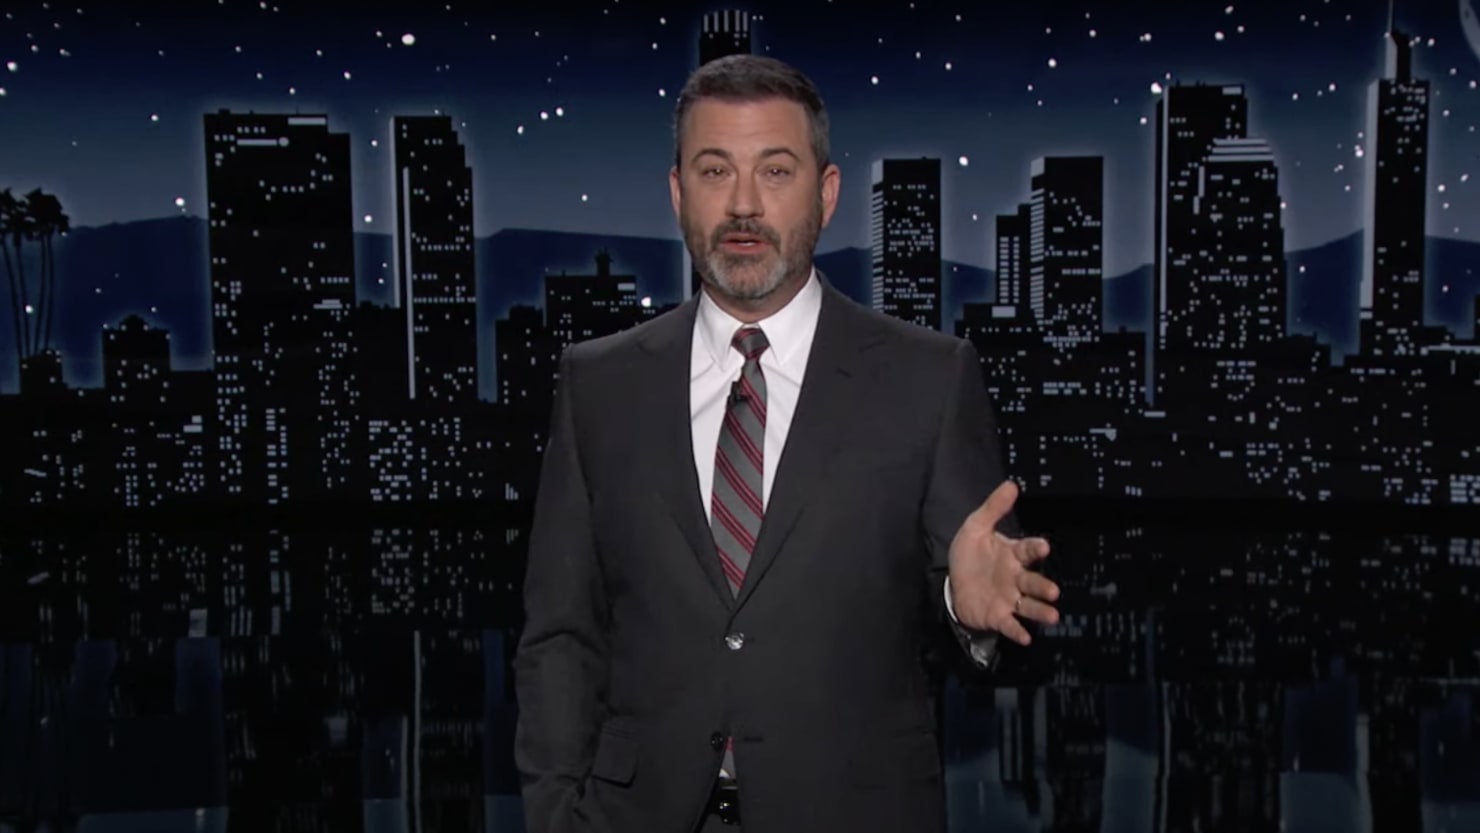 Jimmy Kimmel Drags Sarah Palin for Dining Out After Getting COVID - The Daily Beast : The late-night host couldn’t believe the former “Masked Singer” contestant and anti-vaxxer decided to hit NYC restaurants right after testing positive for COVID.  | Tranquility 國際社群